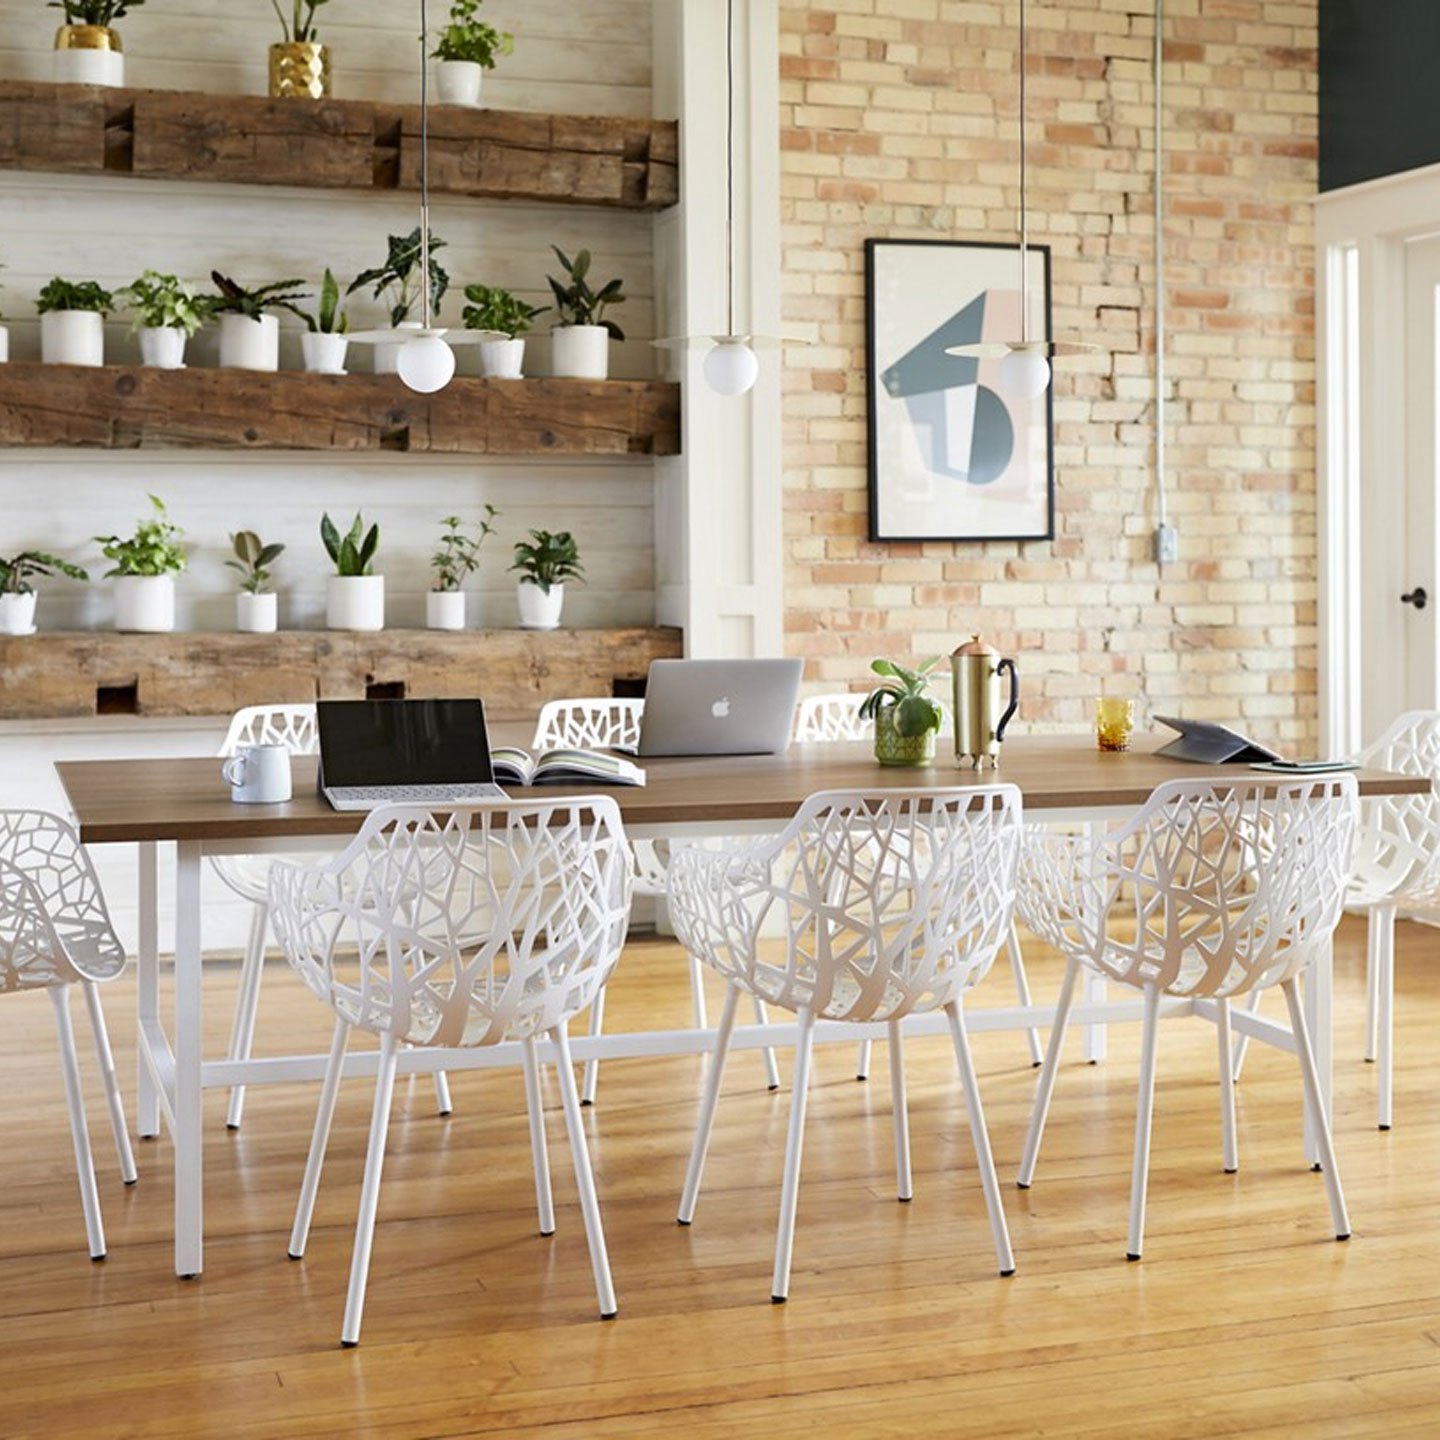 Haworth Forest arm chairs in white at table in a casual indoor space